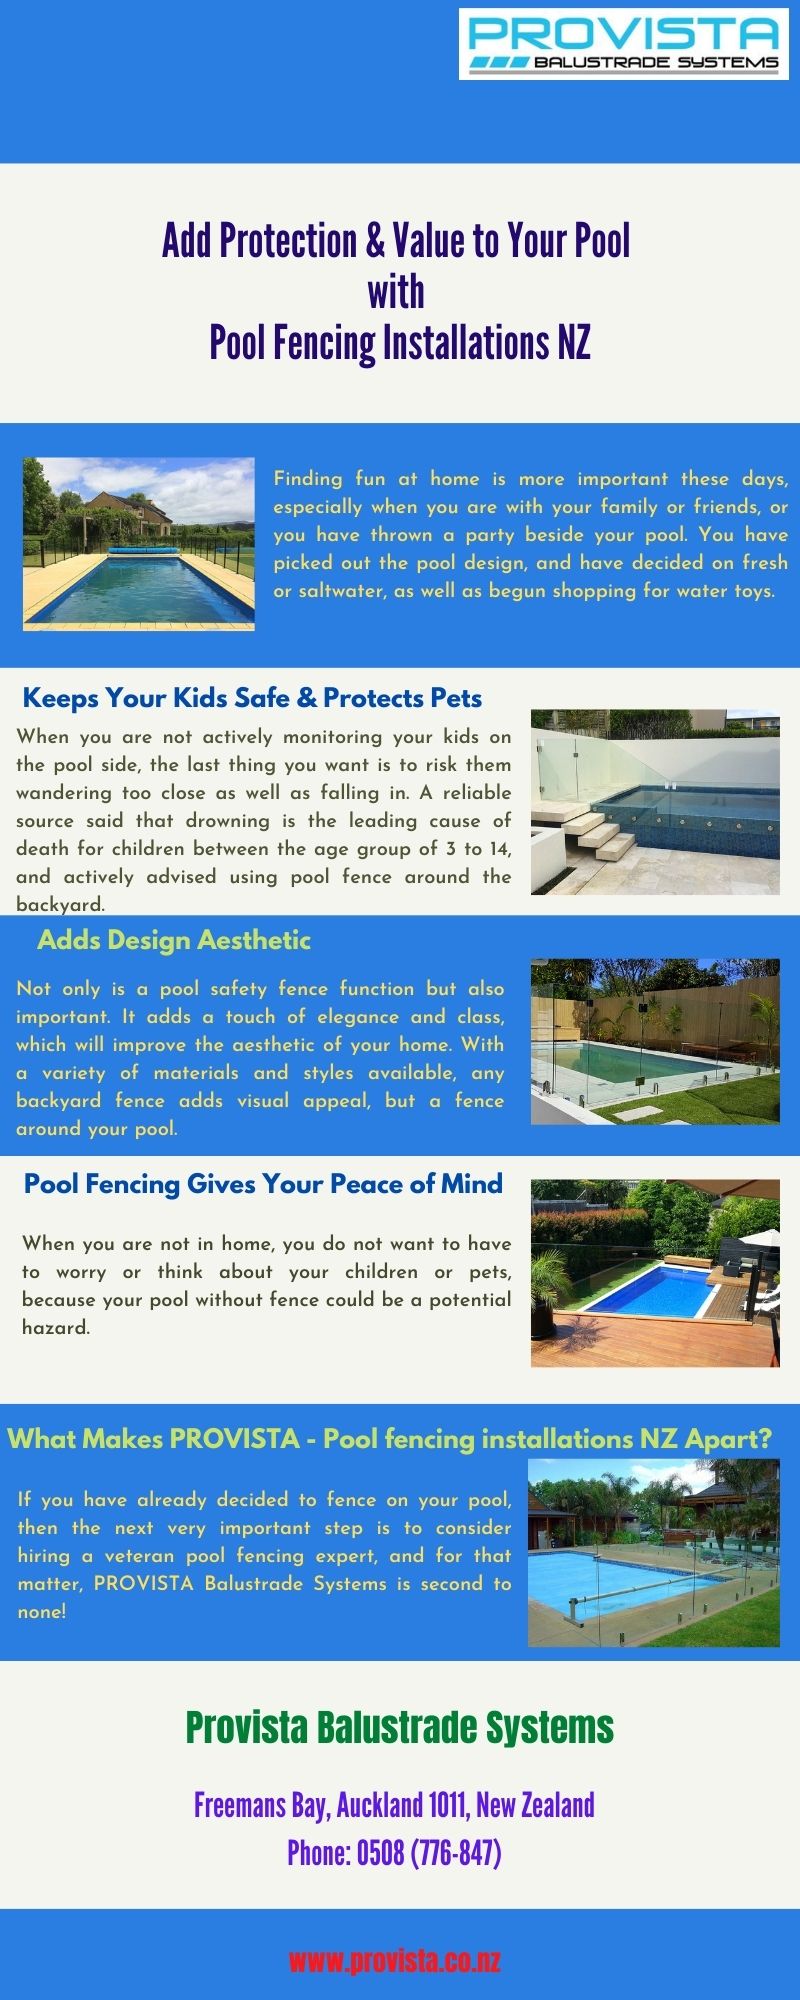 Add Protection & Value to Your Pool with Pool Fencing Installations NZ With pool fencing installations NZ Provista Balustrade Systems, you can add extra protection on your pool and value to your home. Your greatest asset would be! It’s easier than you think! For more details, visit this link: https://bit.ly/3cXRkpx
 by Provista